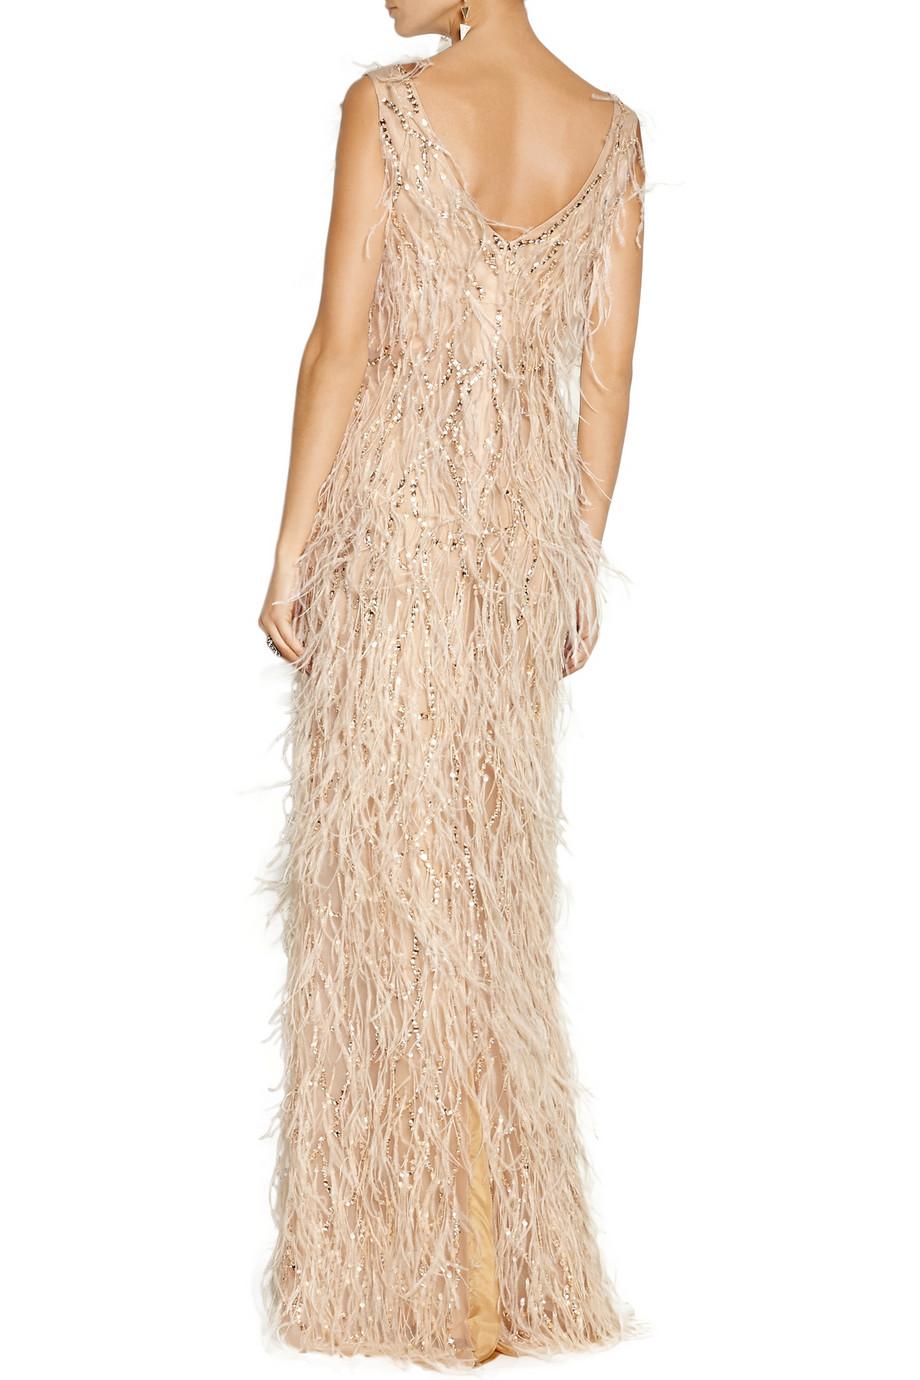 New Museum Oscar De La Renta Ostrich Feather Crystal-Embellished Tulle Dress 8 In New Condition For Sale In Montgomery, TX